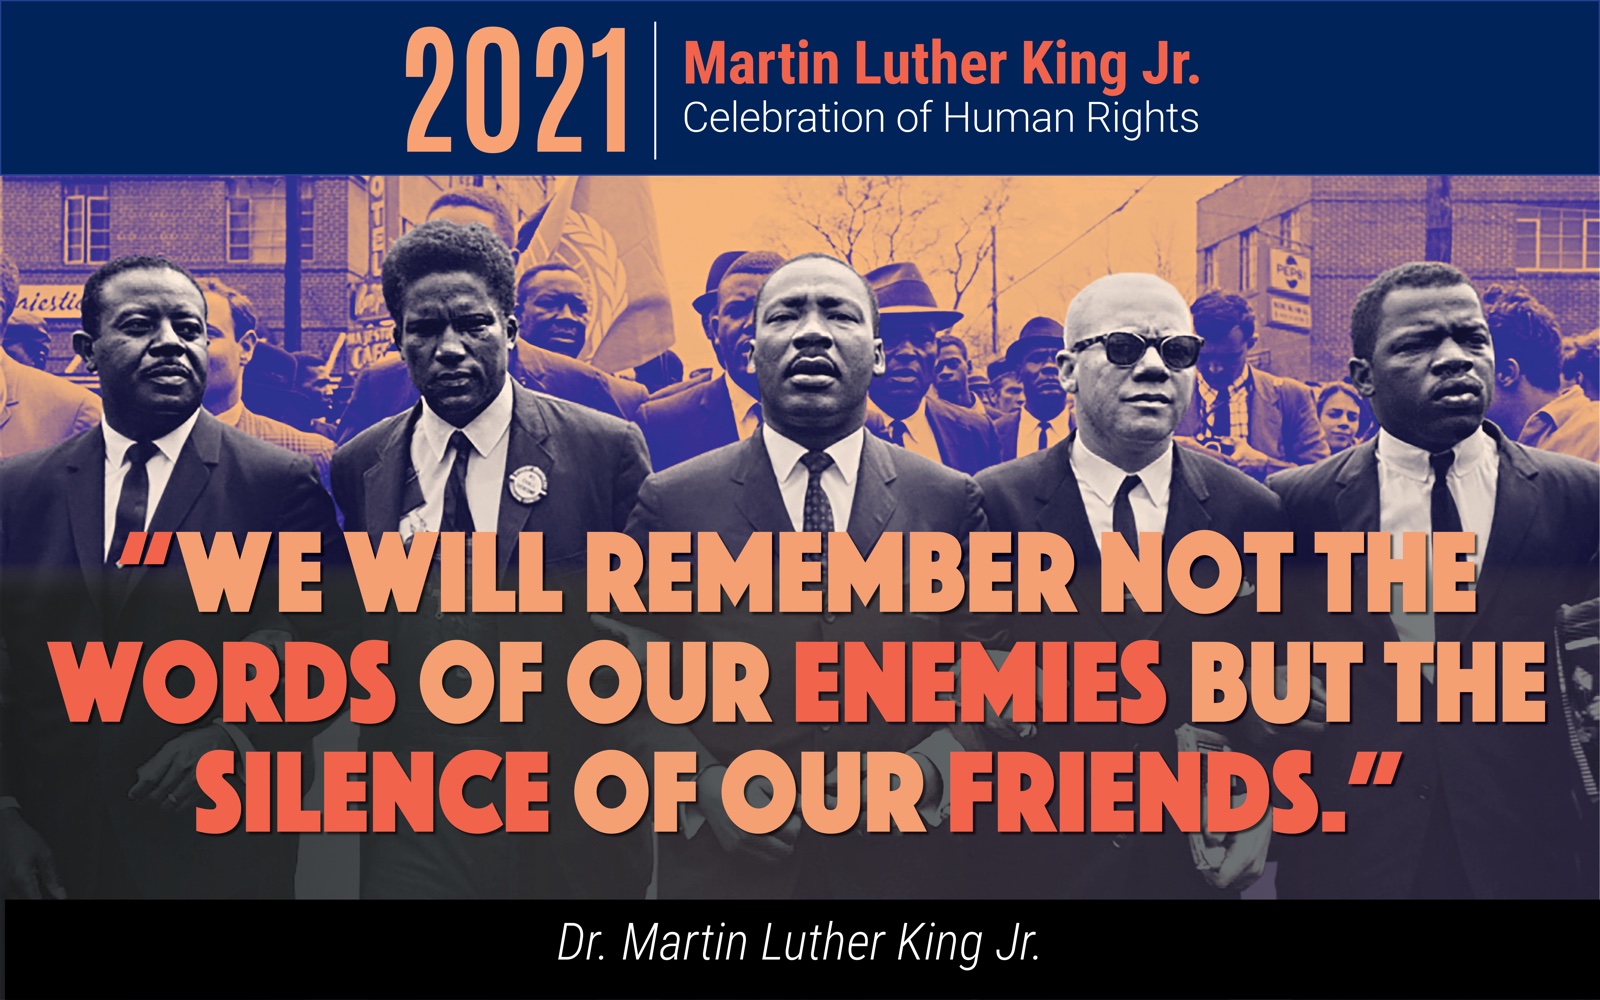 "We will remember not the words of our enemies but the silence of our friends." - Dr. Martin Luther King Jr.